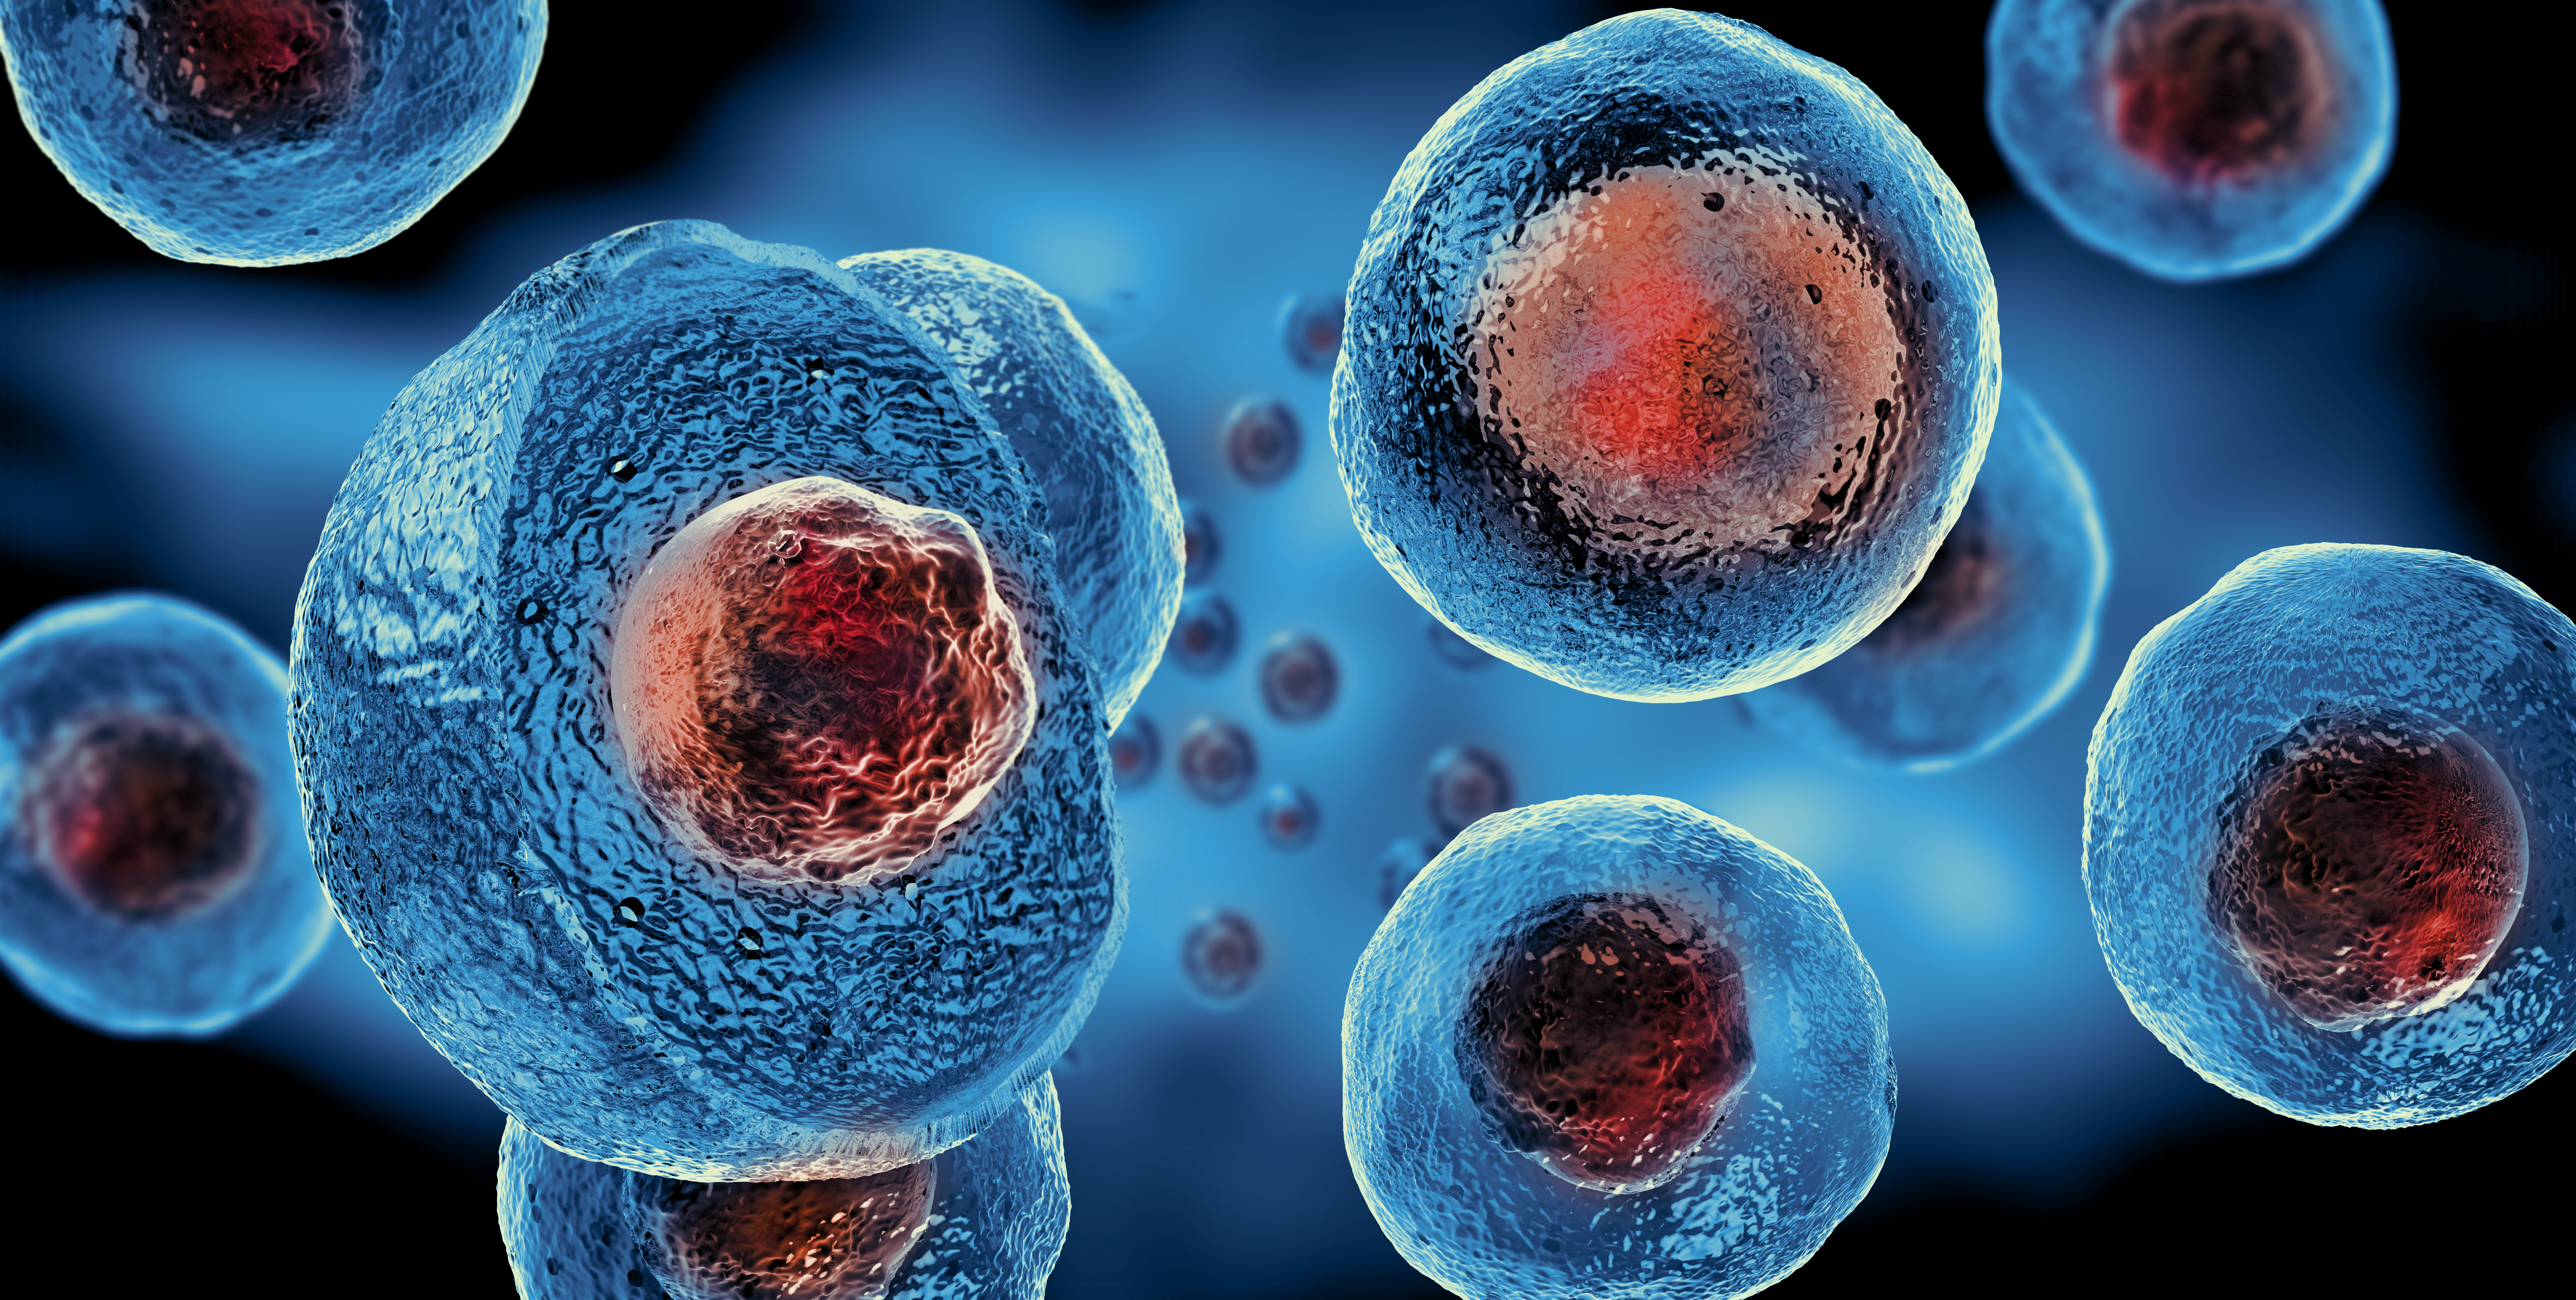 Cancer cell therapies: A promising avenue for investors in the booming cell and gene therapy market